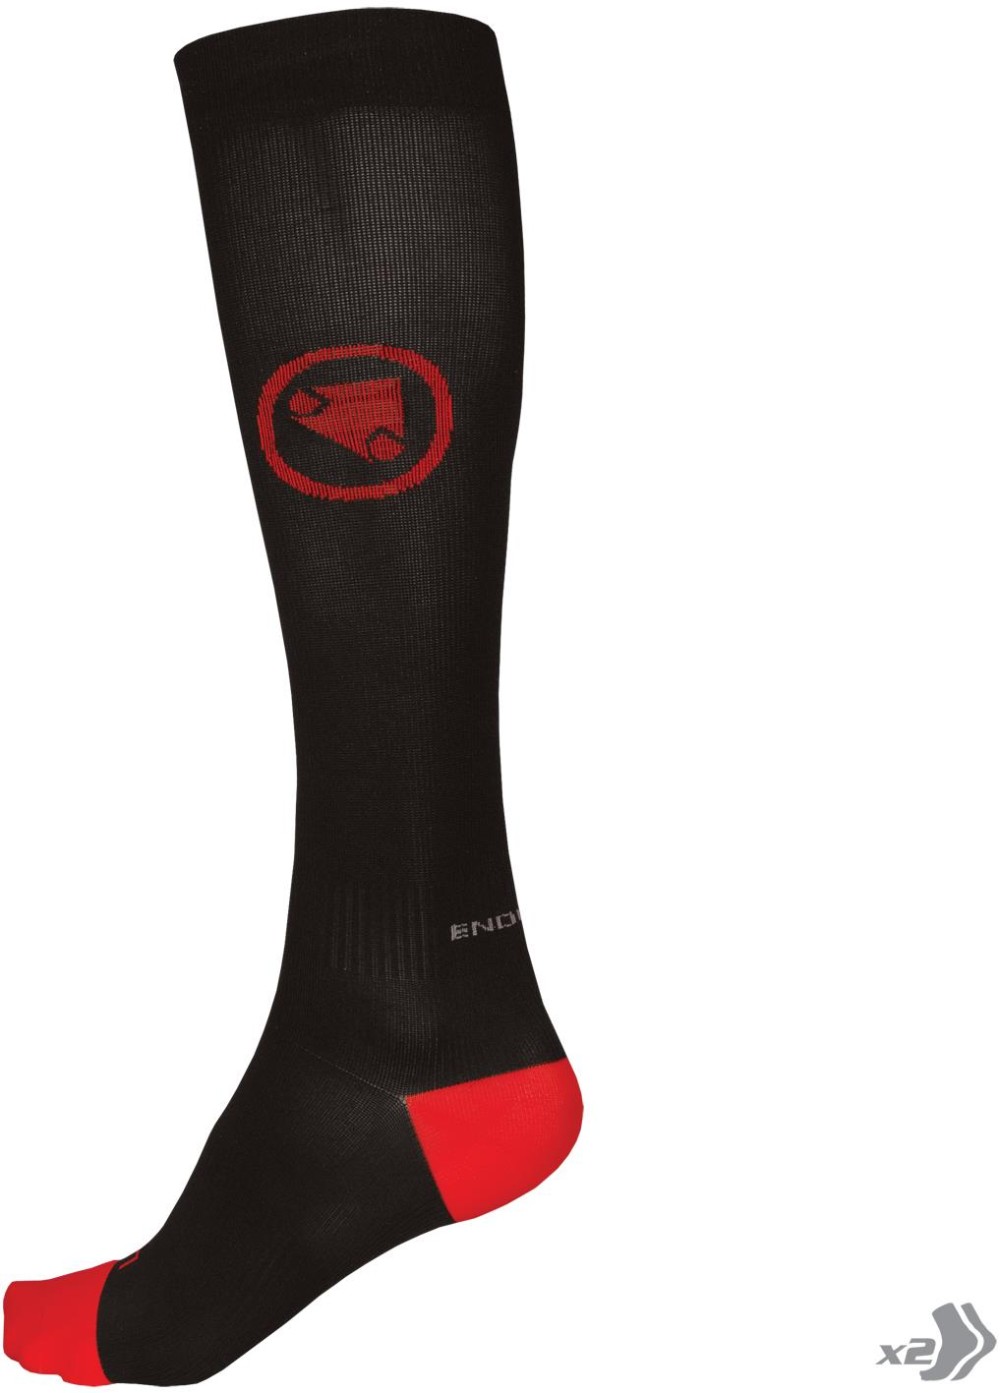 Compression Cycling Socks - 2-Pack image 0